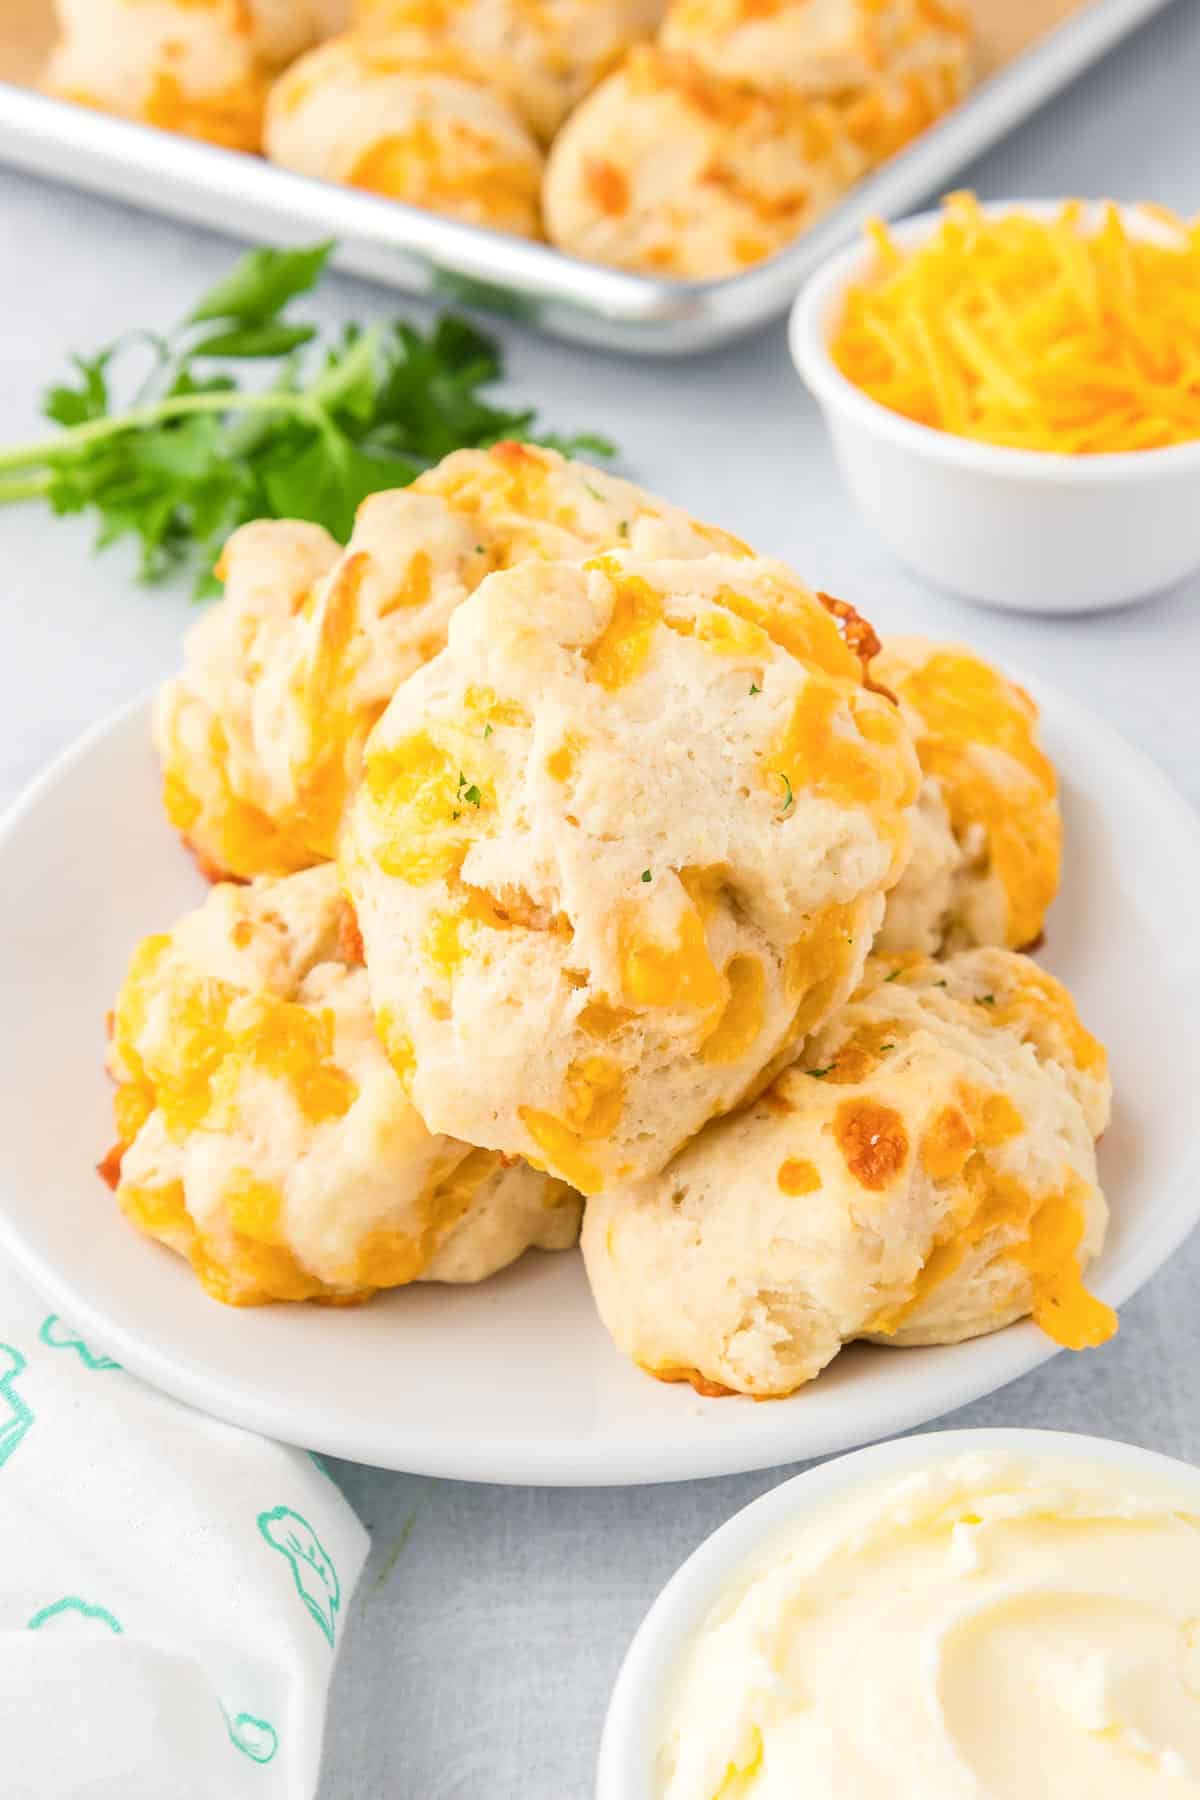 A plate of garlic cheese drop biscuits with more biscuits on a pan, cheese in a bowl, butter and a napkin around the biscuits.